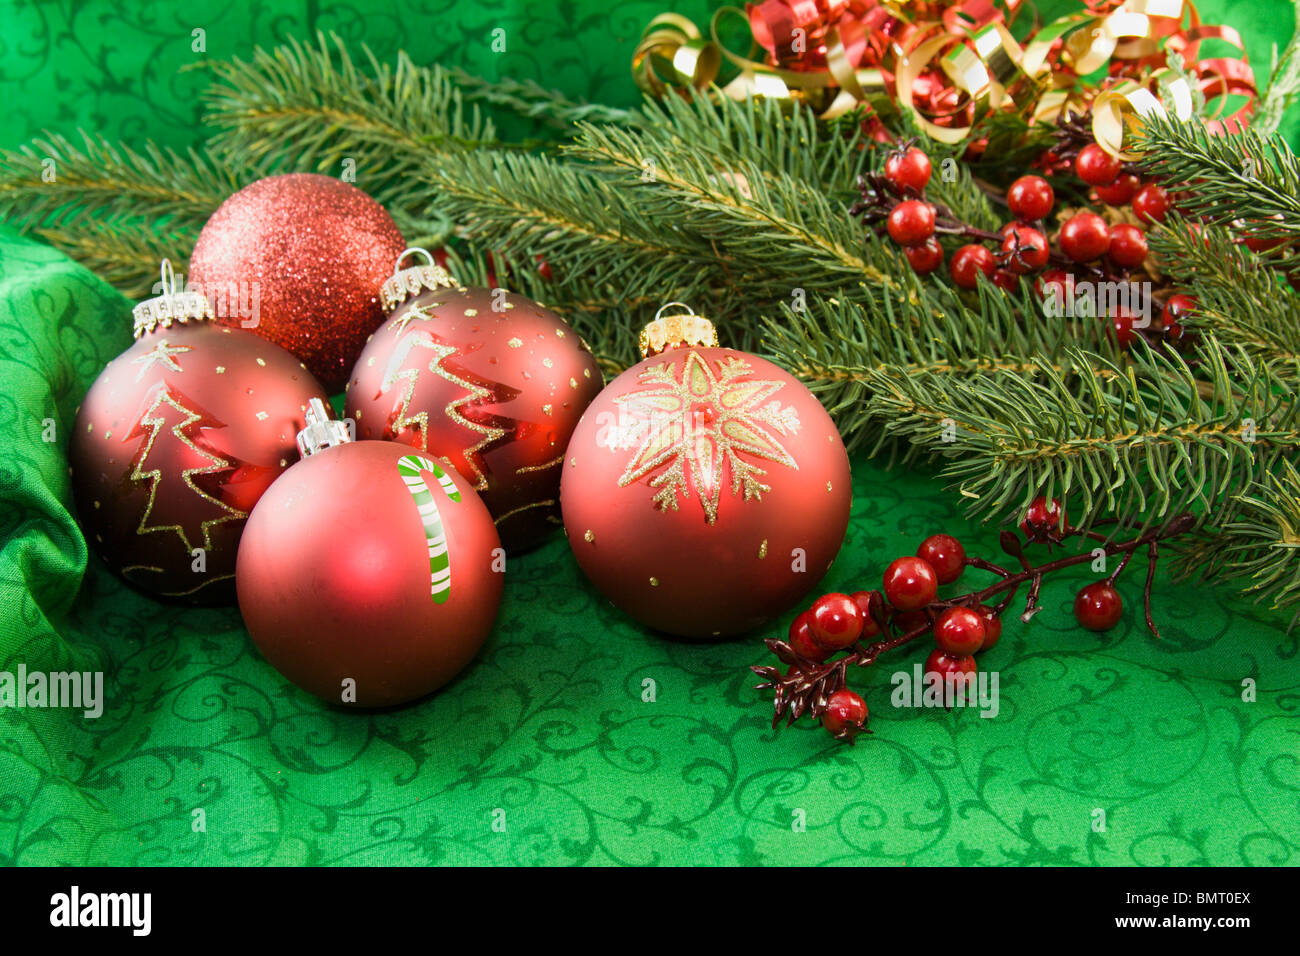 red Christmas ornaments on a green background with fir branch and holly accents Stock Photo